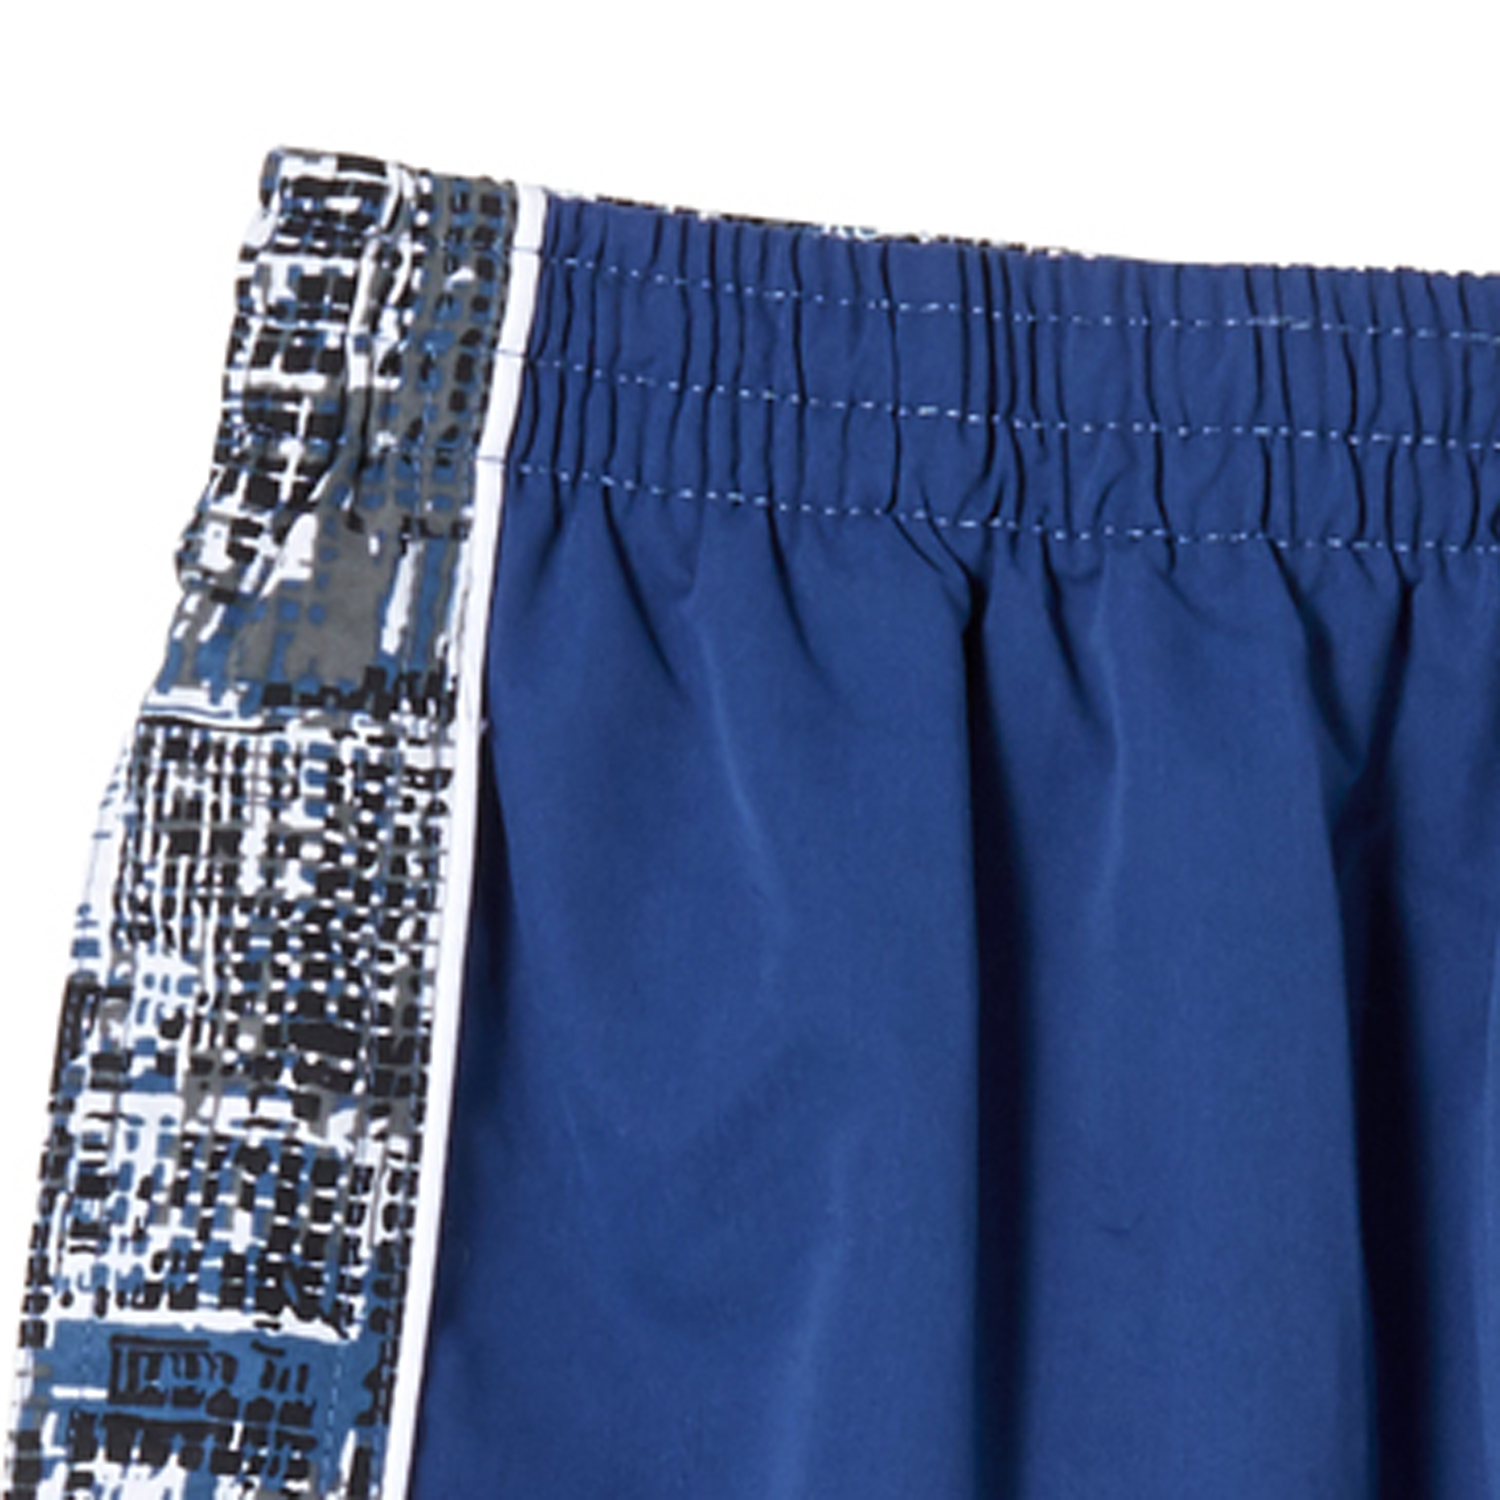 Swim bermudas in royal blue by eleMar up to oversize 10XL